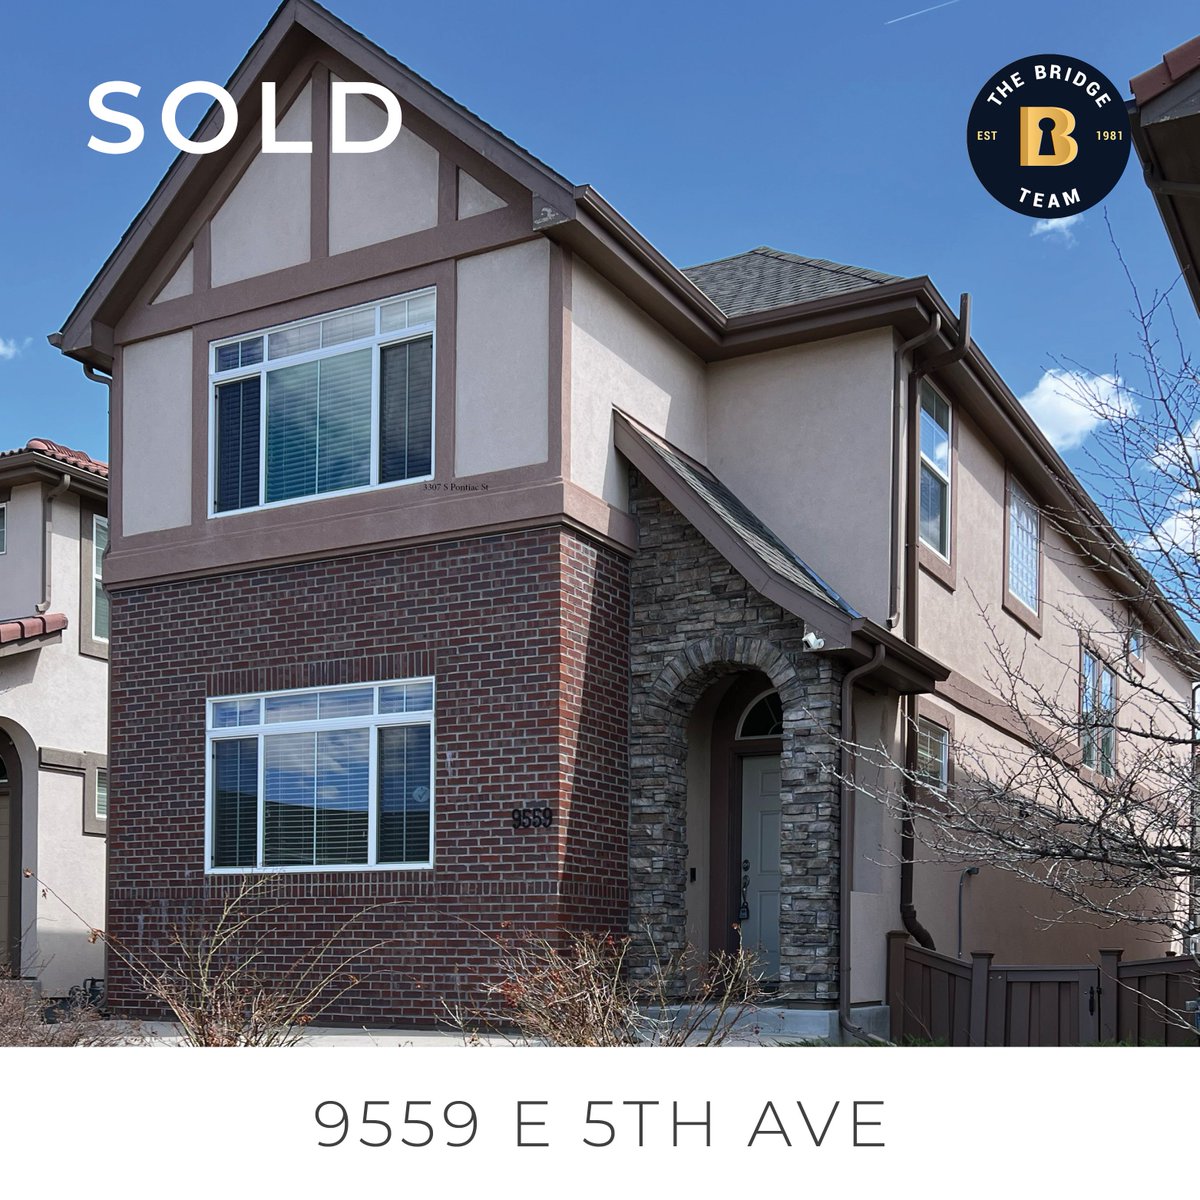 Celebrating our wonderful buyers who just closed on their new home! Our team was instrumental in helping them navigate the process, and we’re happy to share that, with our expert negotiation skills, they got a great deal on this home!🎉

#homebuyertips #denverrealestate